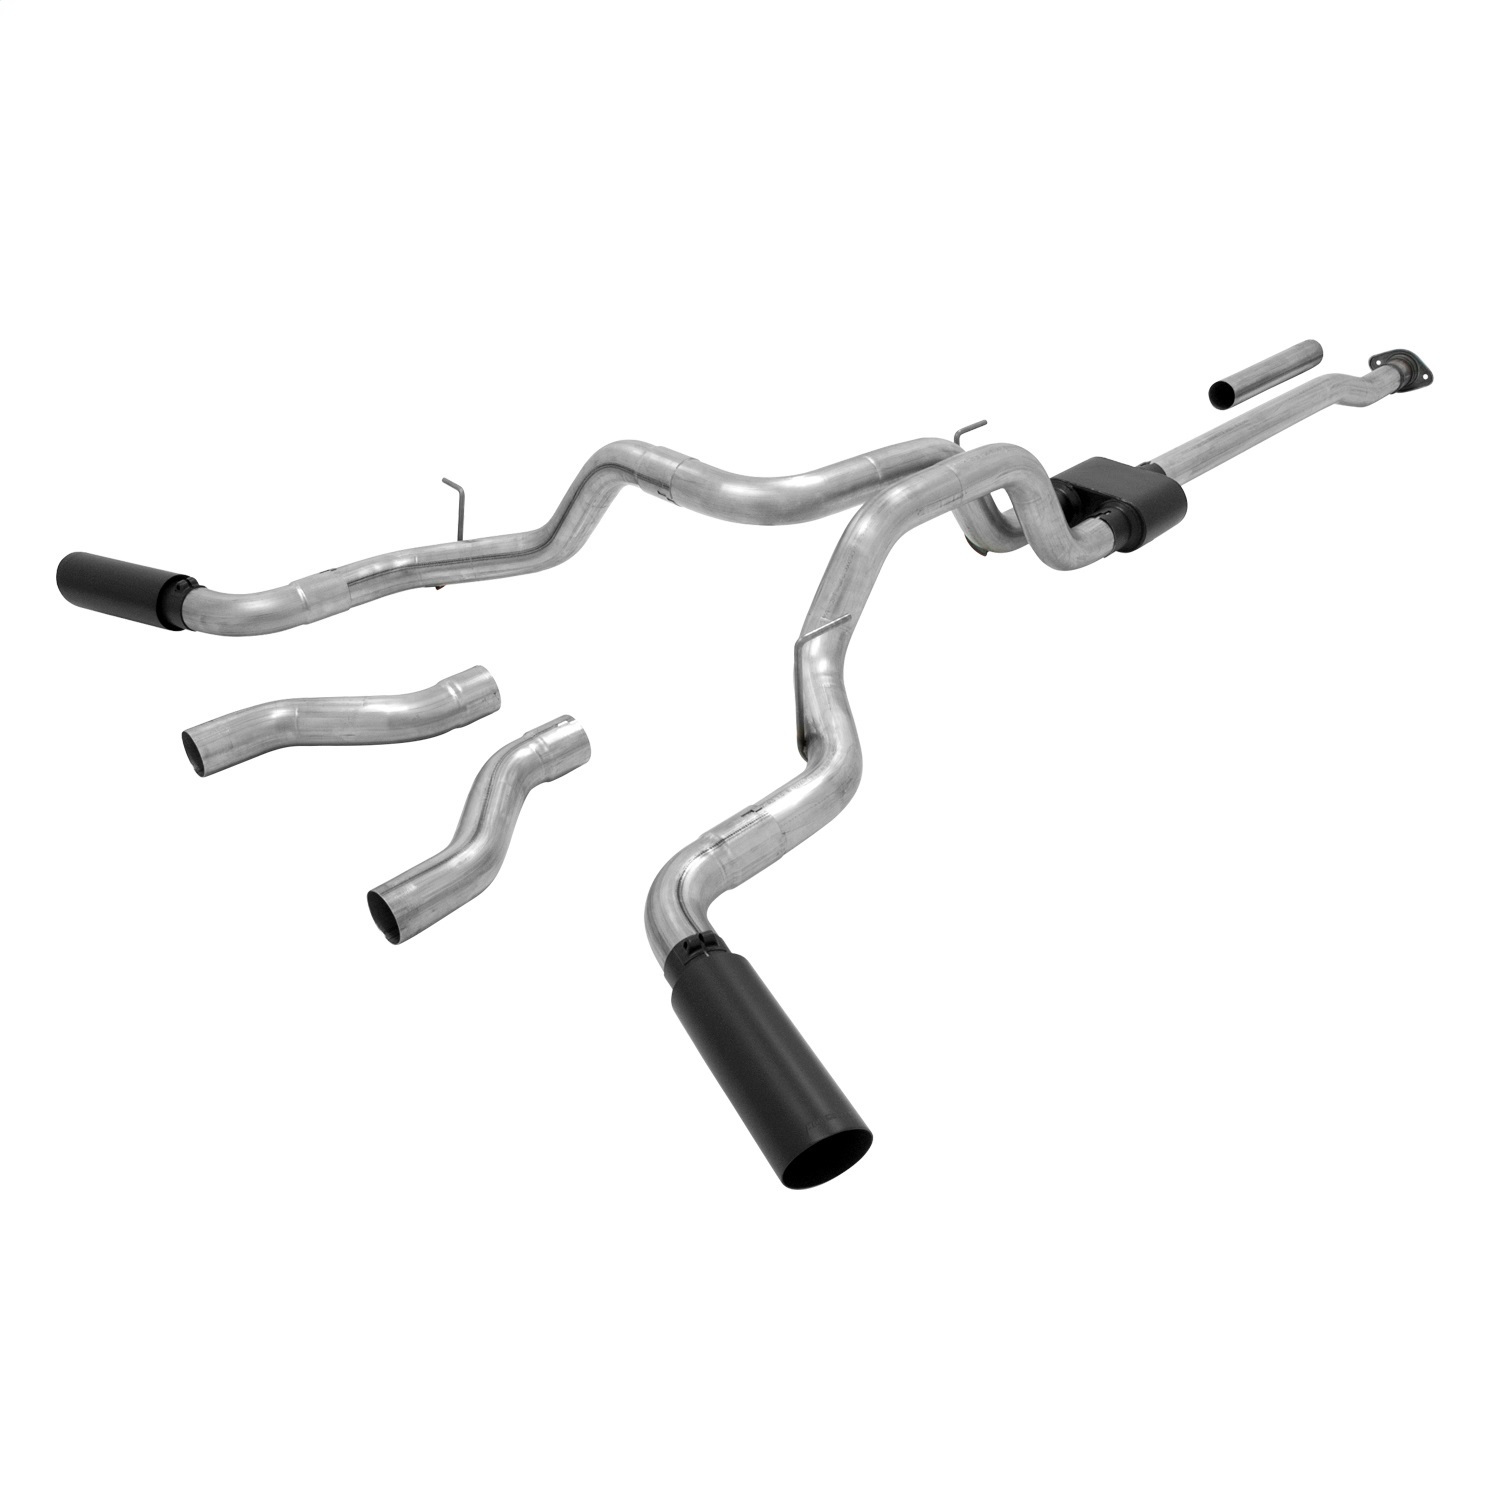 Flowmaster Flowmaster 817691 Outlaw Series Cat Back Exhaust System Fits 09-14 F-150